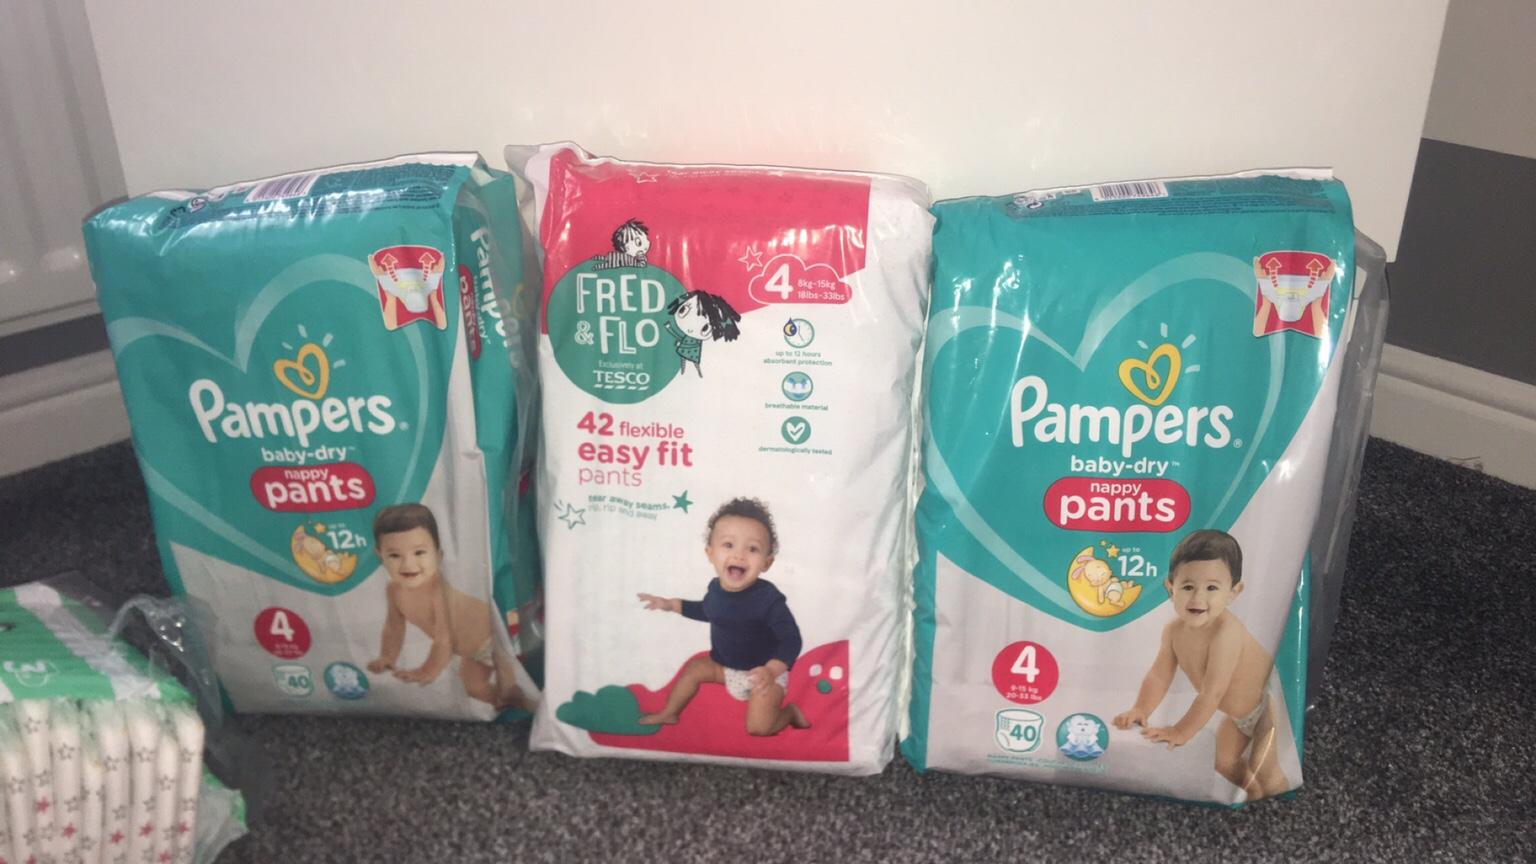 tesco pampers nappy pants size 4